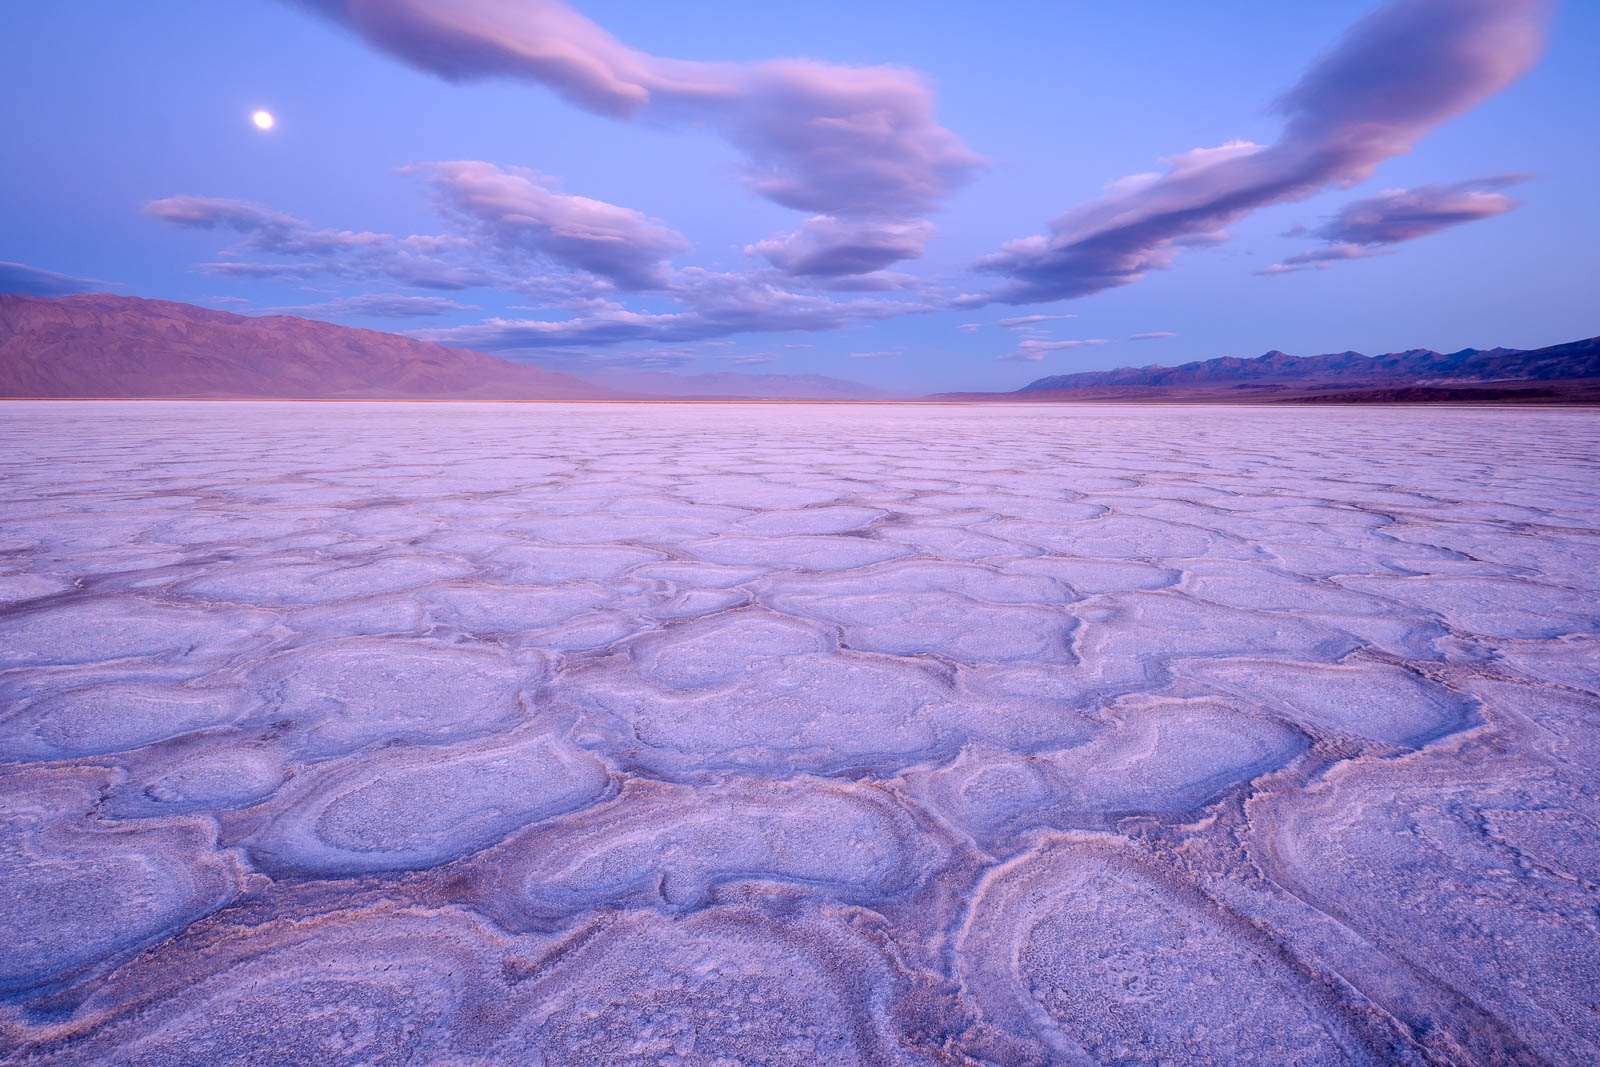 Time, Twilight, blue, california, clouds, death valley national park, landscape orientation, mojave desert, moon, peaceful, pink...